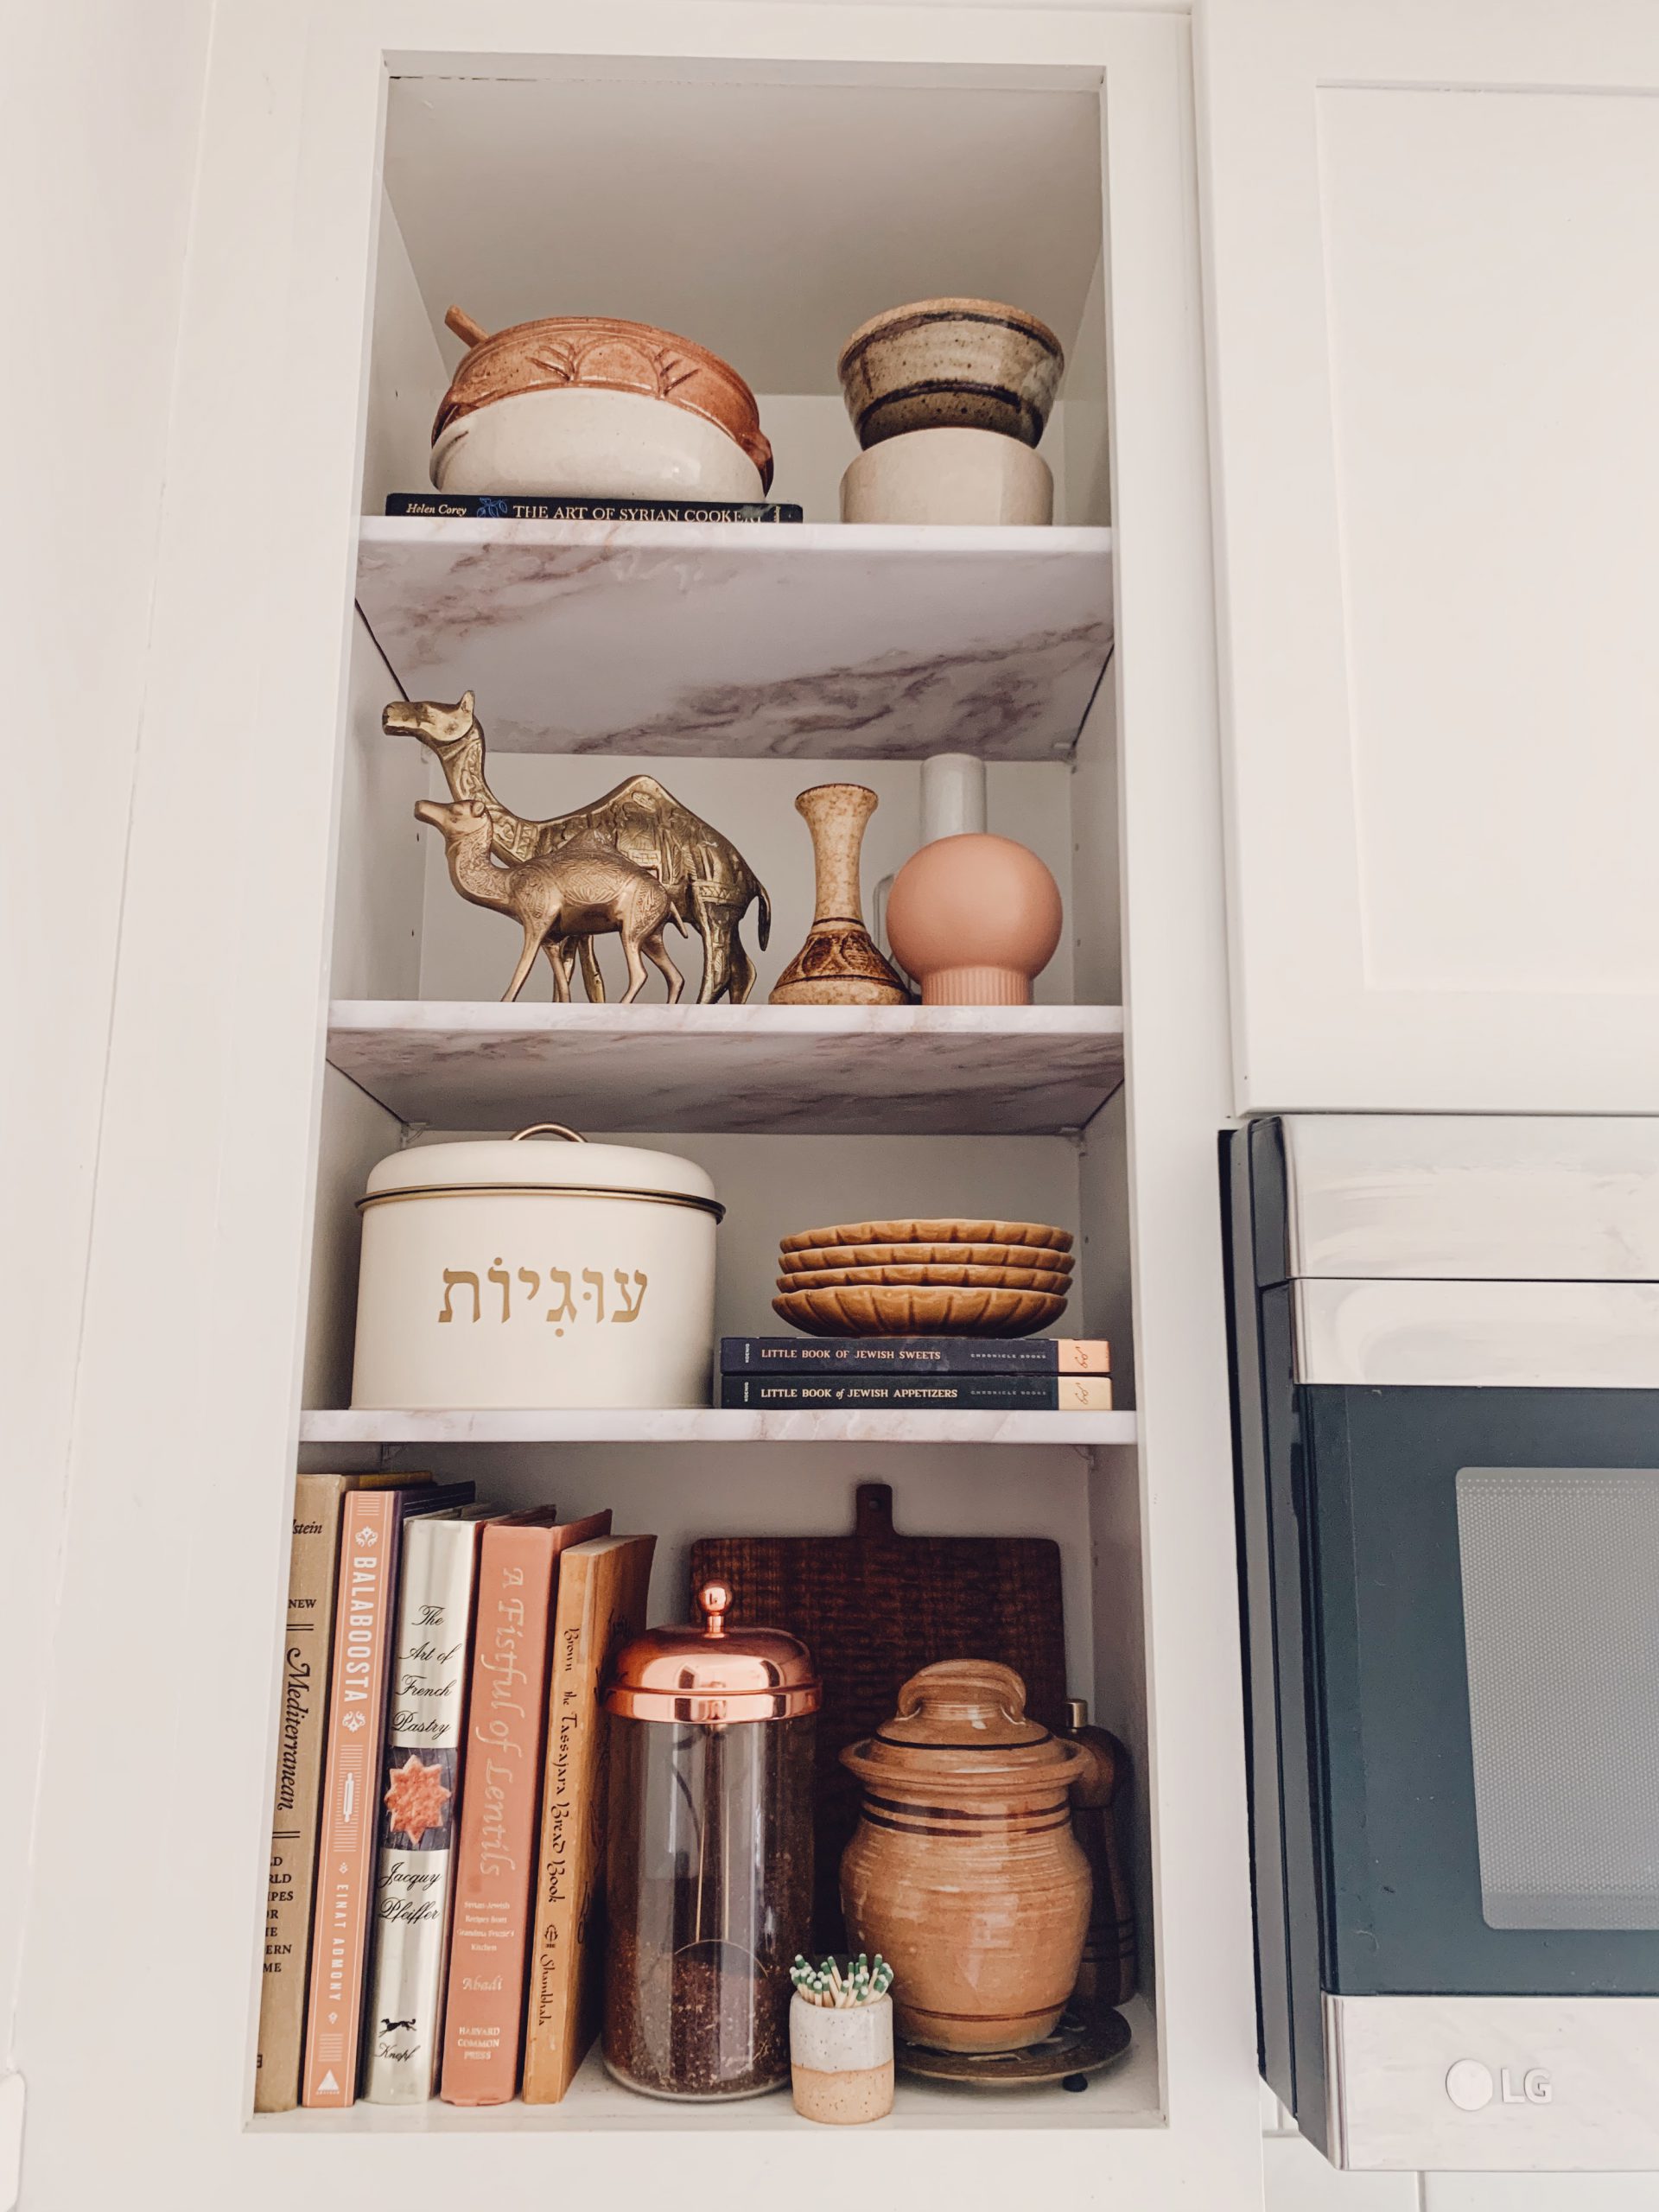 An open kitchen shelf, with faux marble contact paper shelf coverings and decor.